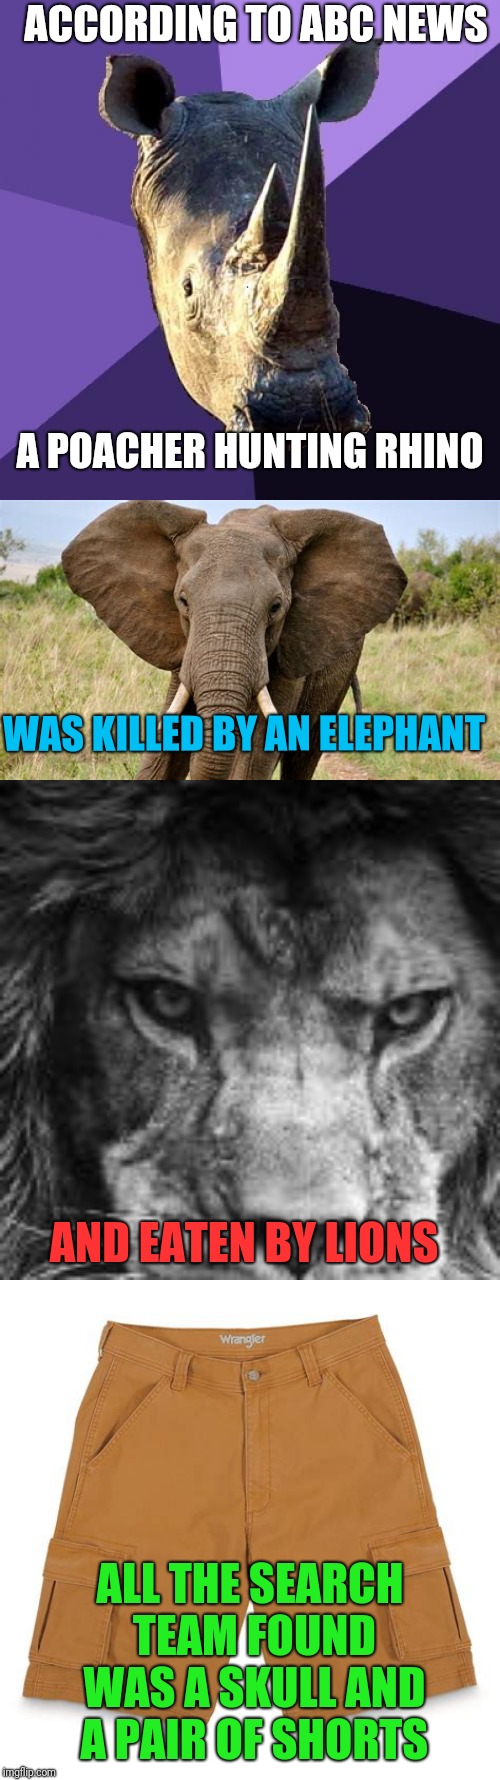 Neighborhood Watch? | ACCORDING TO ABC NEWS; A POACHER HUNTING RHINO; WAS KILLED BY AN ELEPHANT; AND EATEN BY LIONS; ALL THE SEARCH TEAM FOUND WAS A SKULL AND A PAIR OF SHORTS | image tagged in memes,sexually oblivious rhino | made w/ Imgflip meme maker